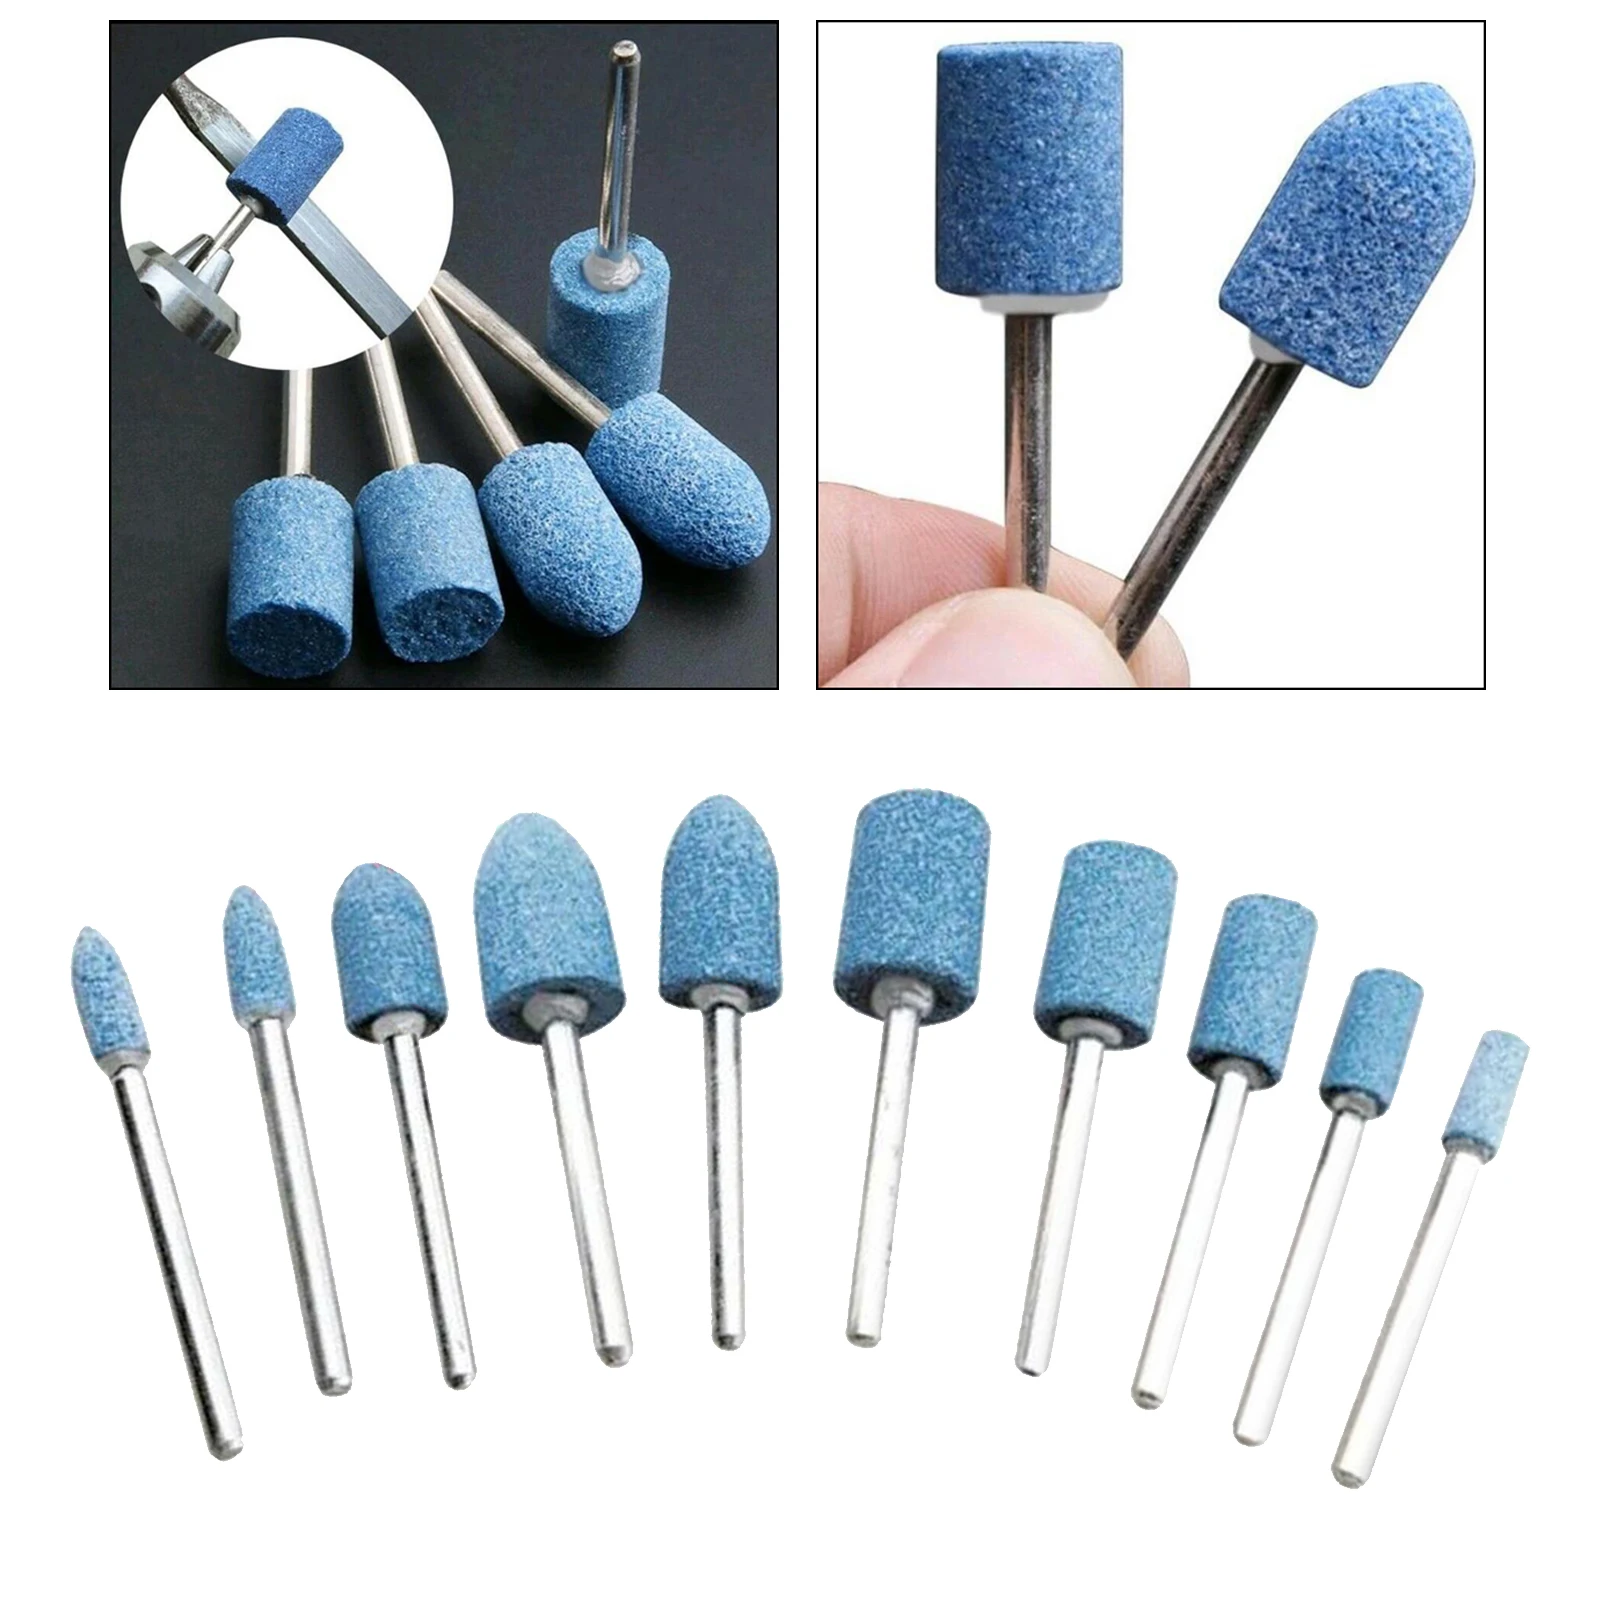 

Pack of 10 Cutting Burrs Rotary Files Bits for Die Grinder Metal Grinding Woodworking Drilling Carving